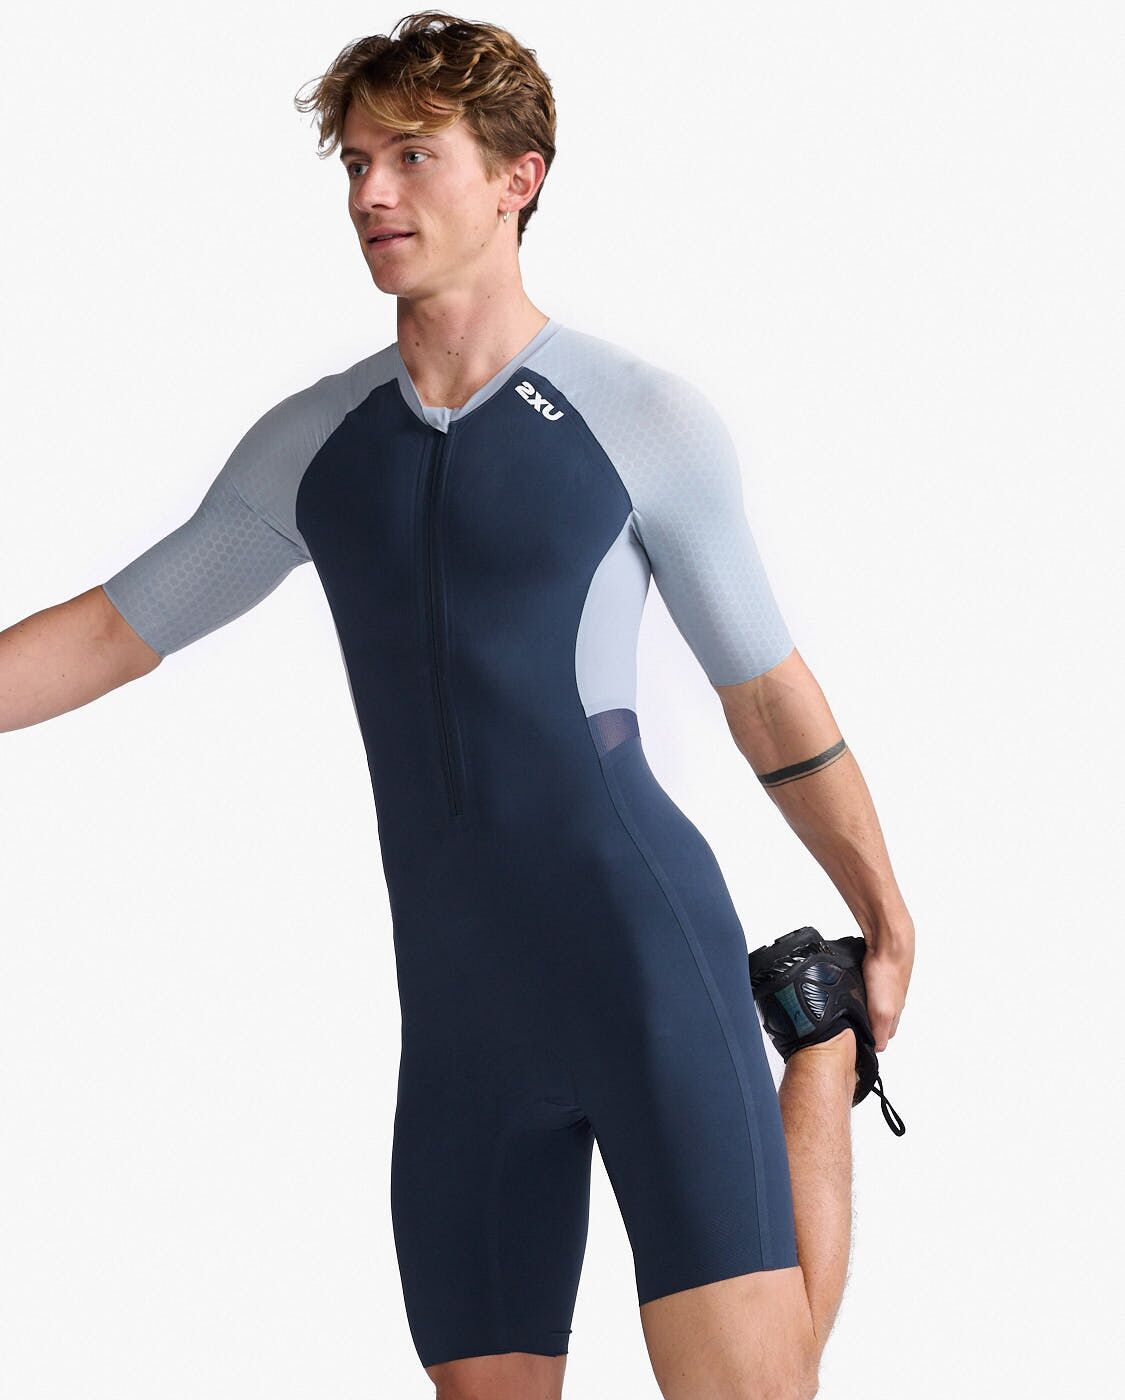 2XU South Africa - Mens Light Speed Tech Sleeved Trisuit - OUT/WHT